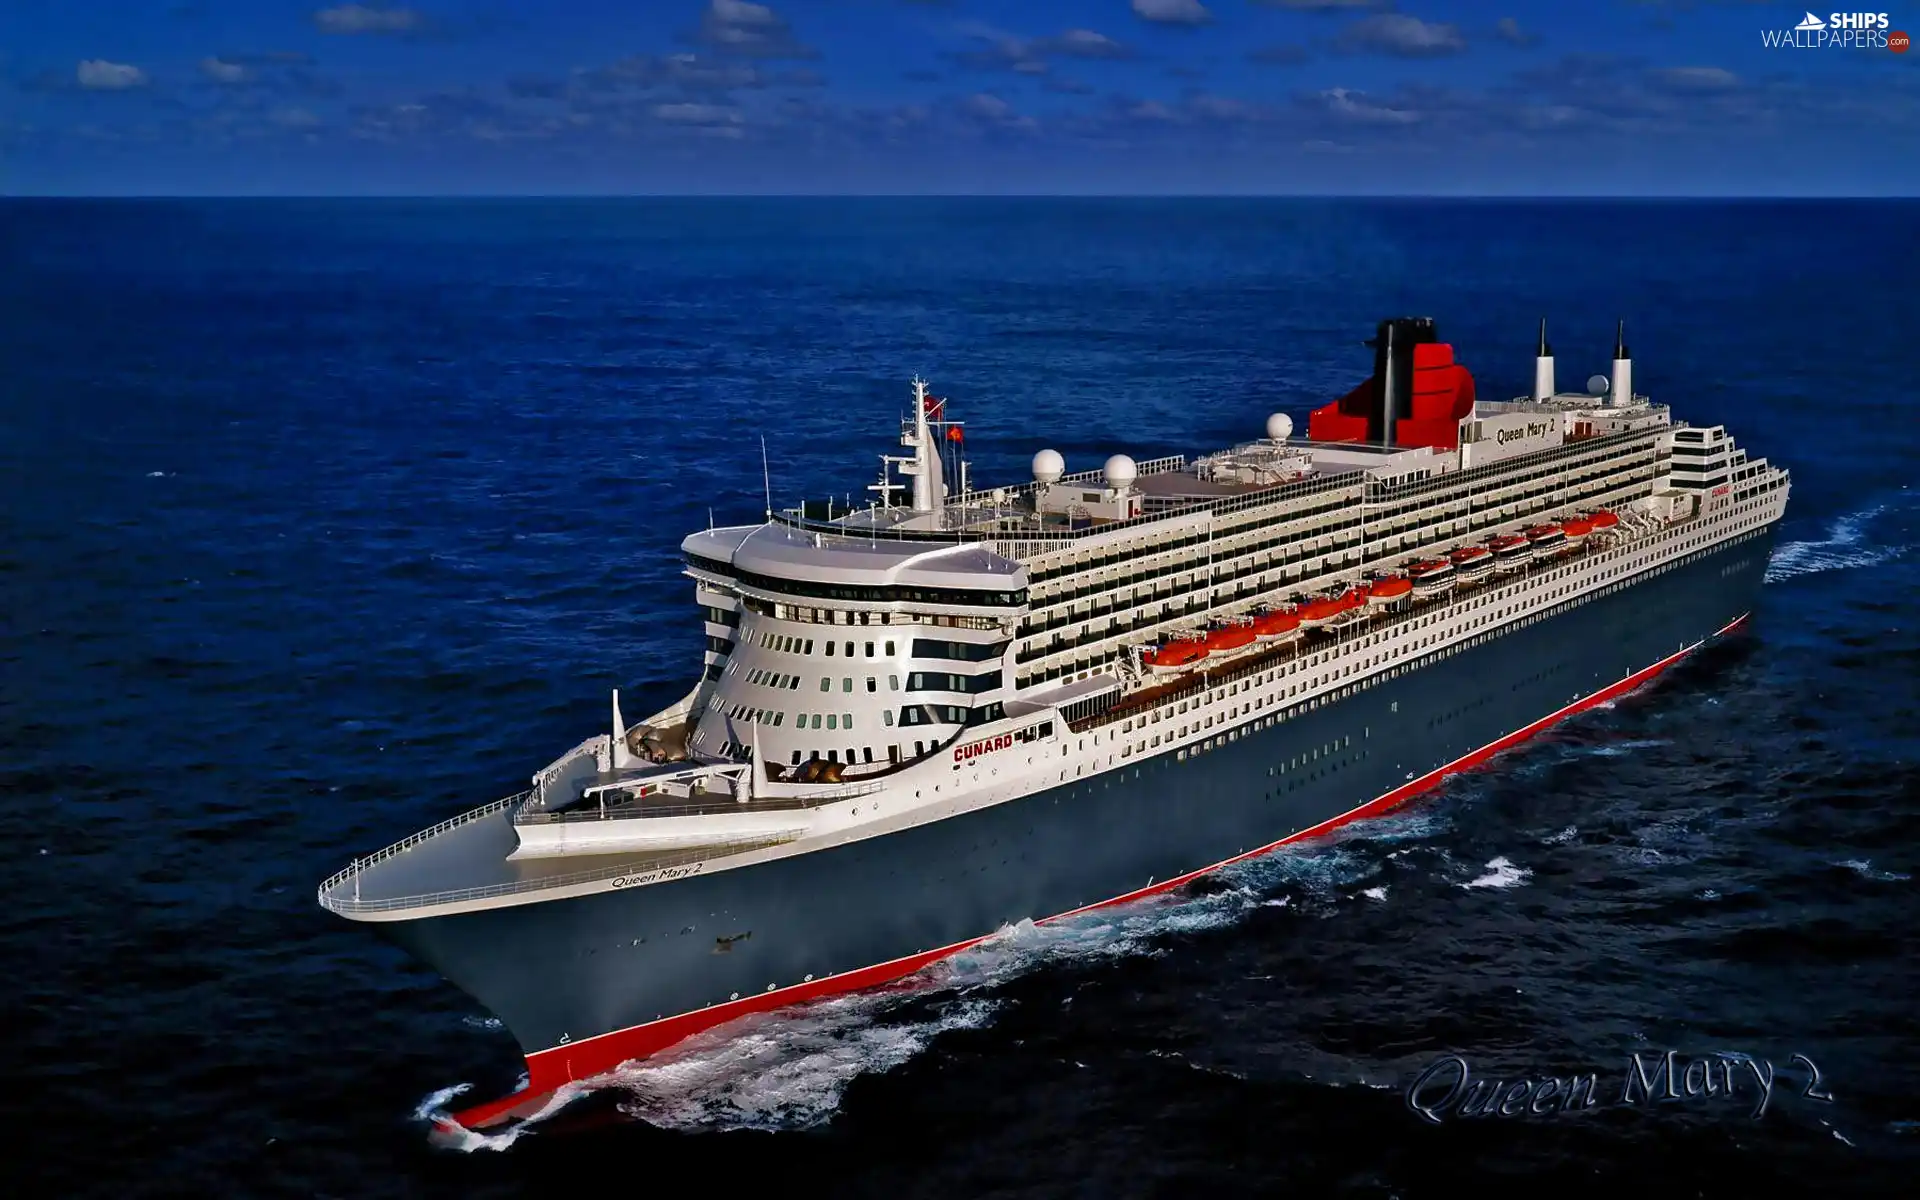 Queen Mary 2, cruise